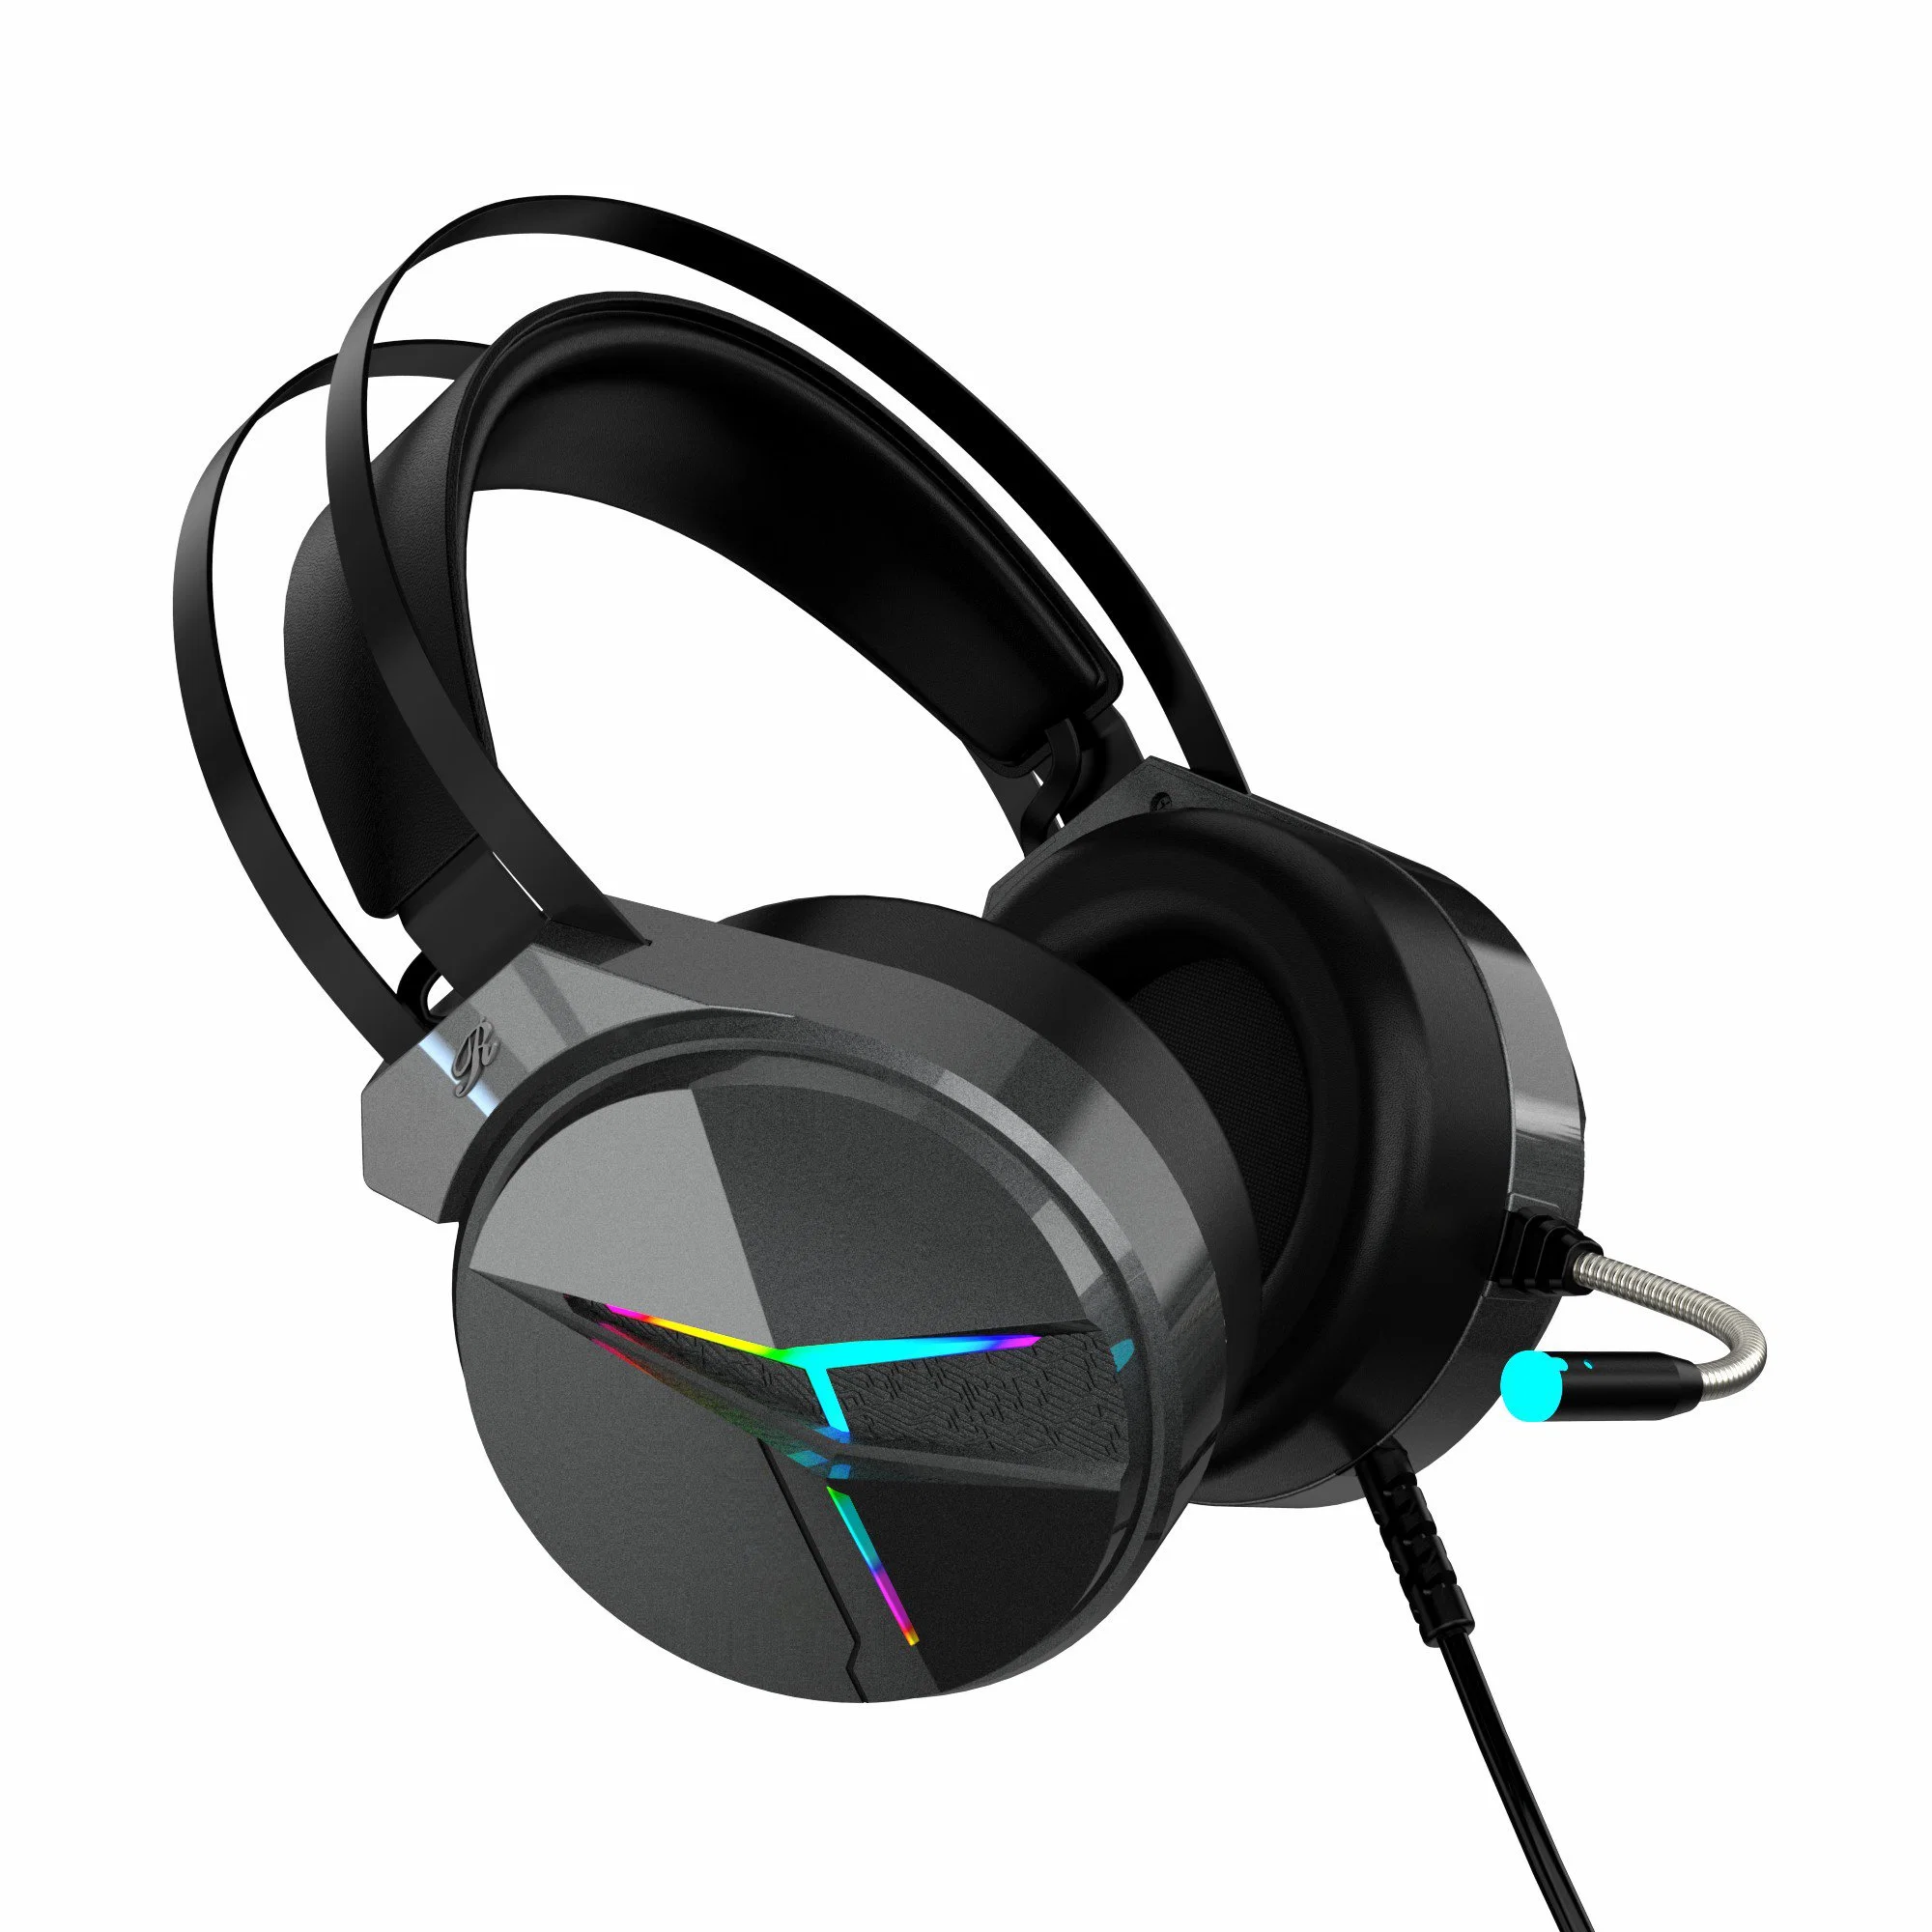 RGB Light USB Stereo Headset Computer Gaming Headset with Microphone